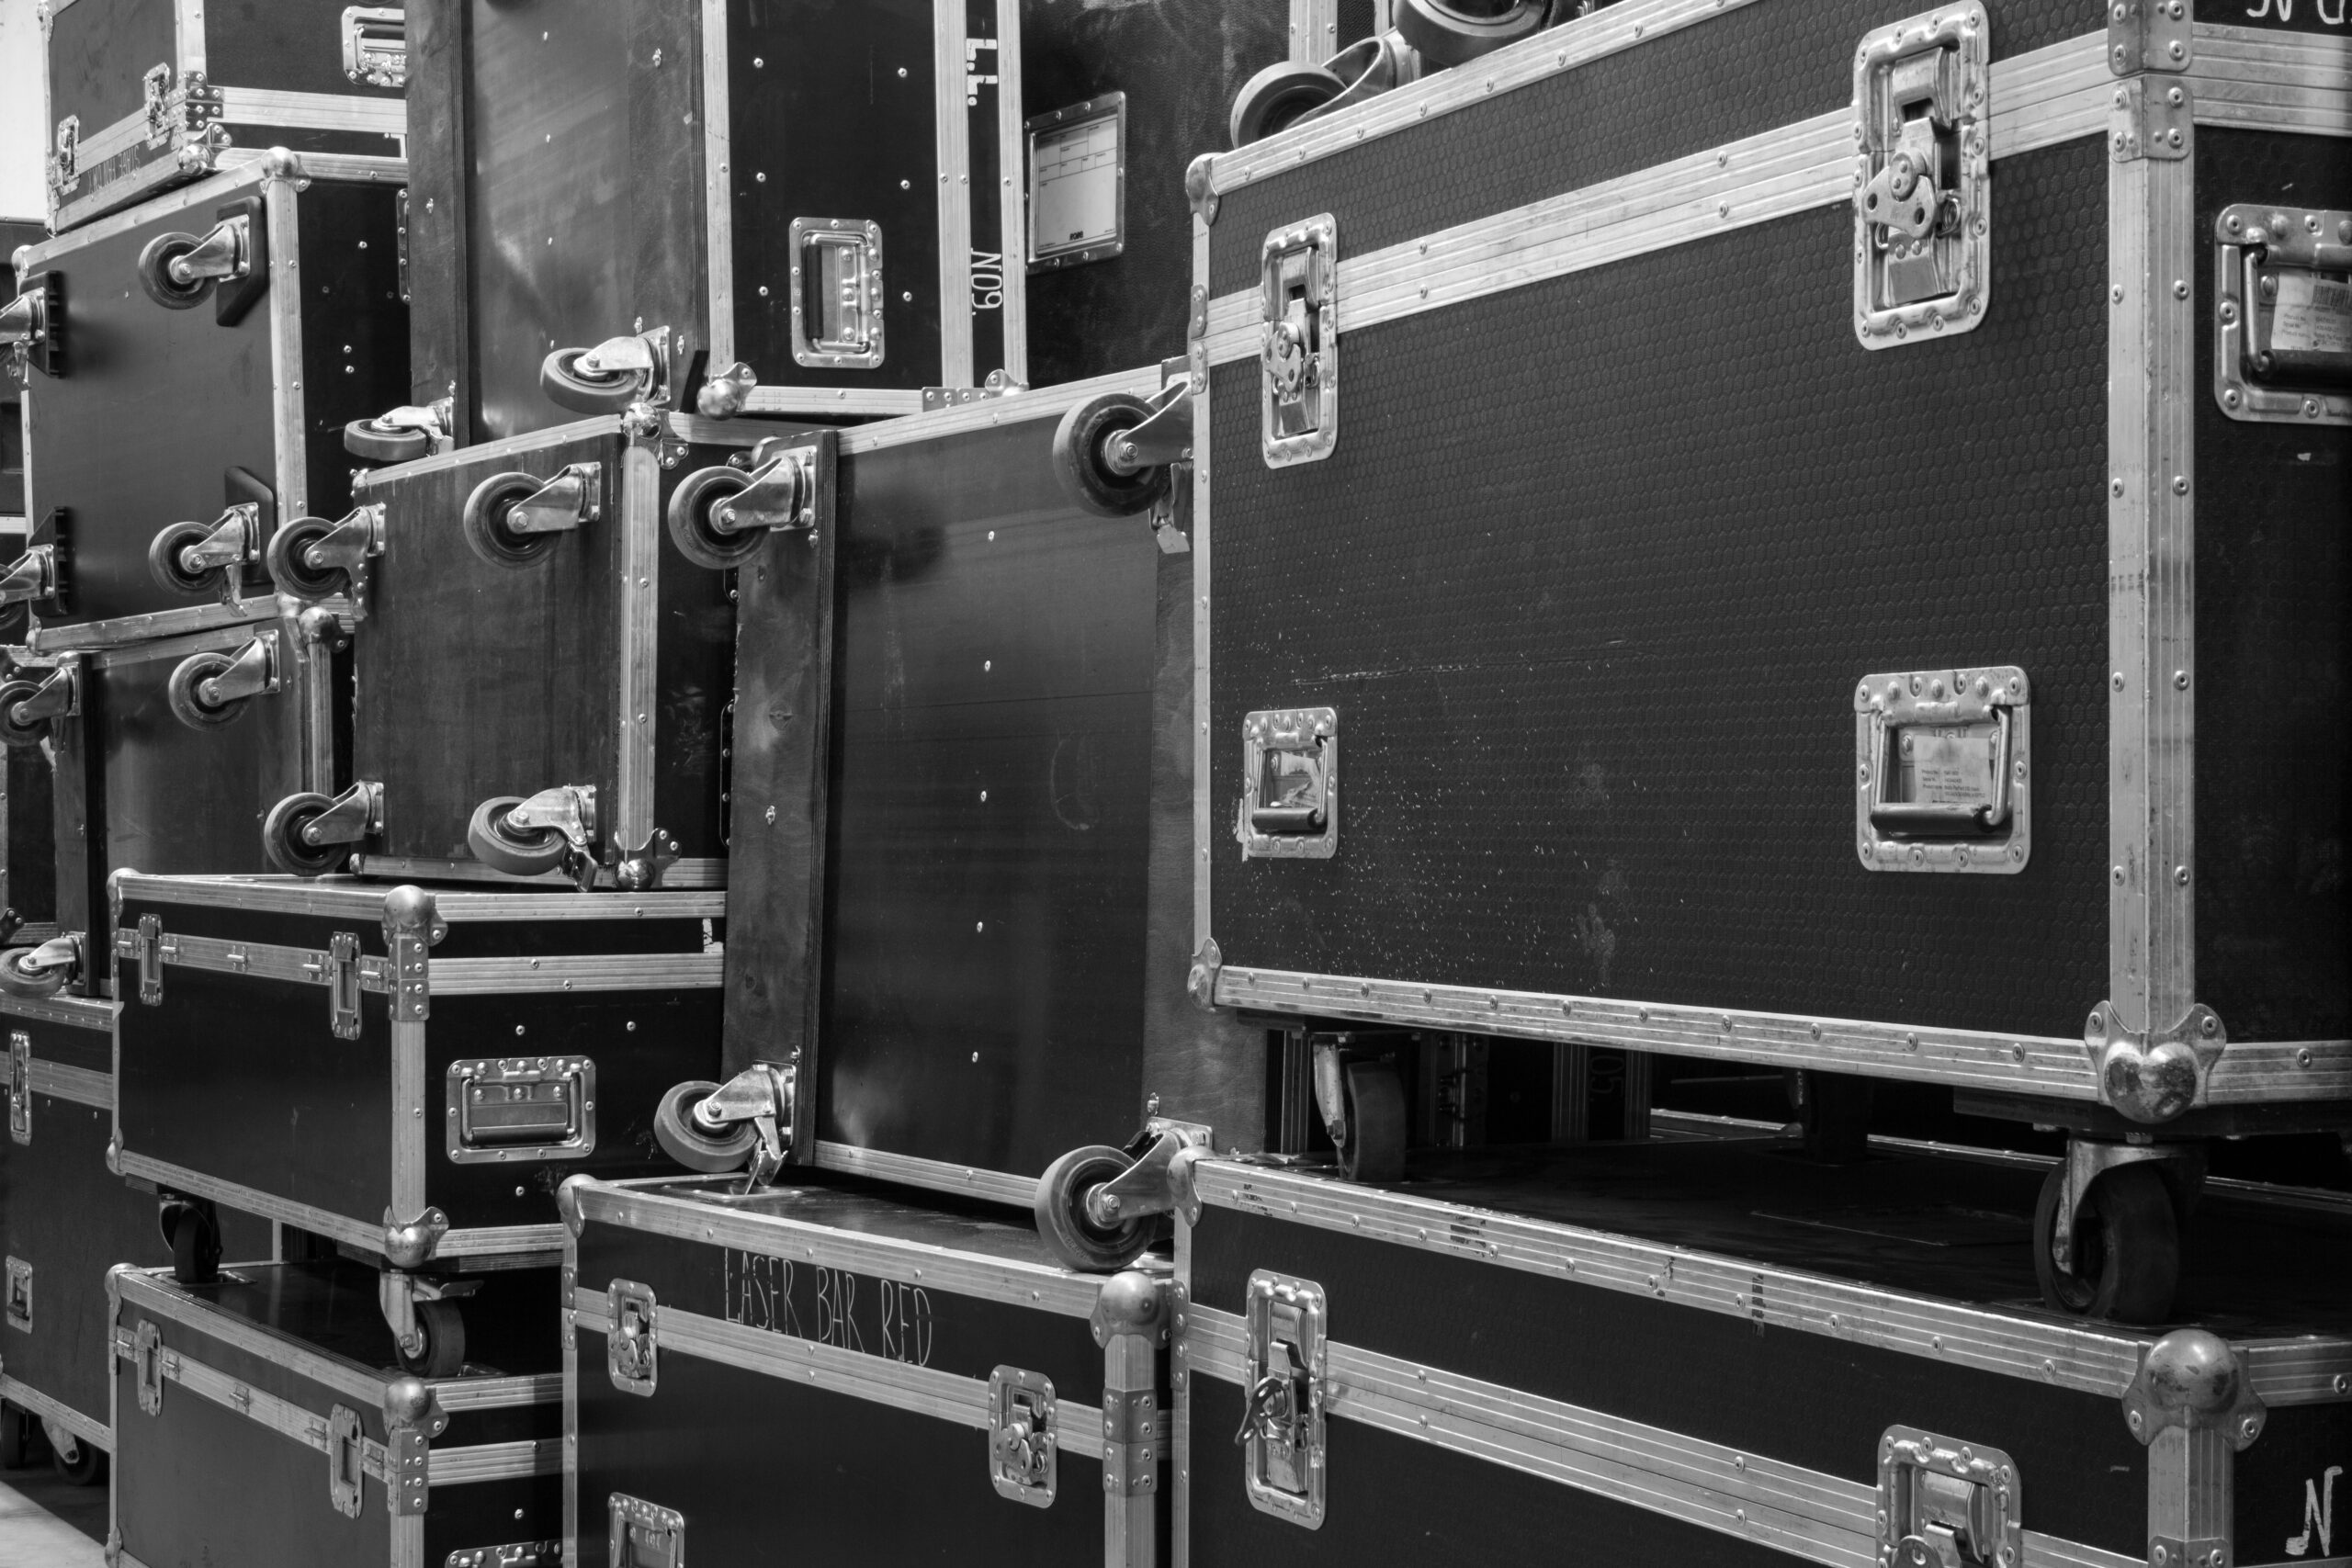 Protective flight cases on backstage zone. Storage with empty flight cases from professional concert equipment.